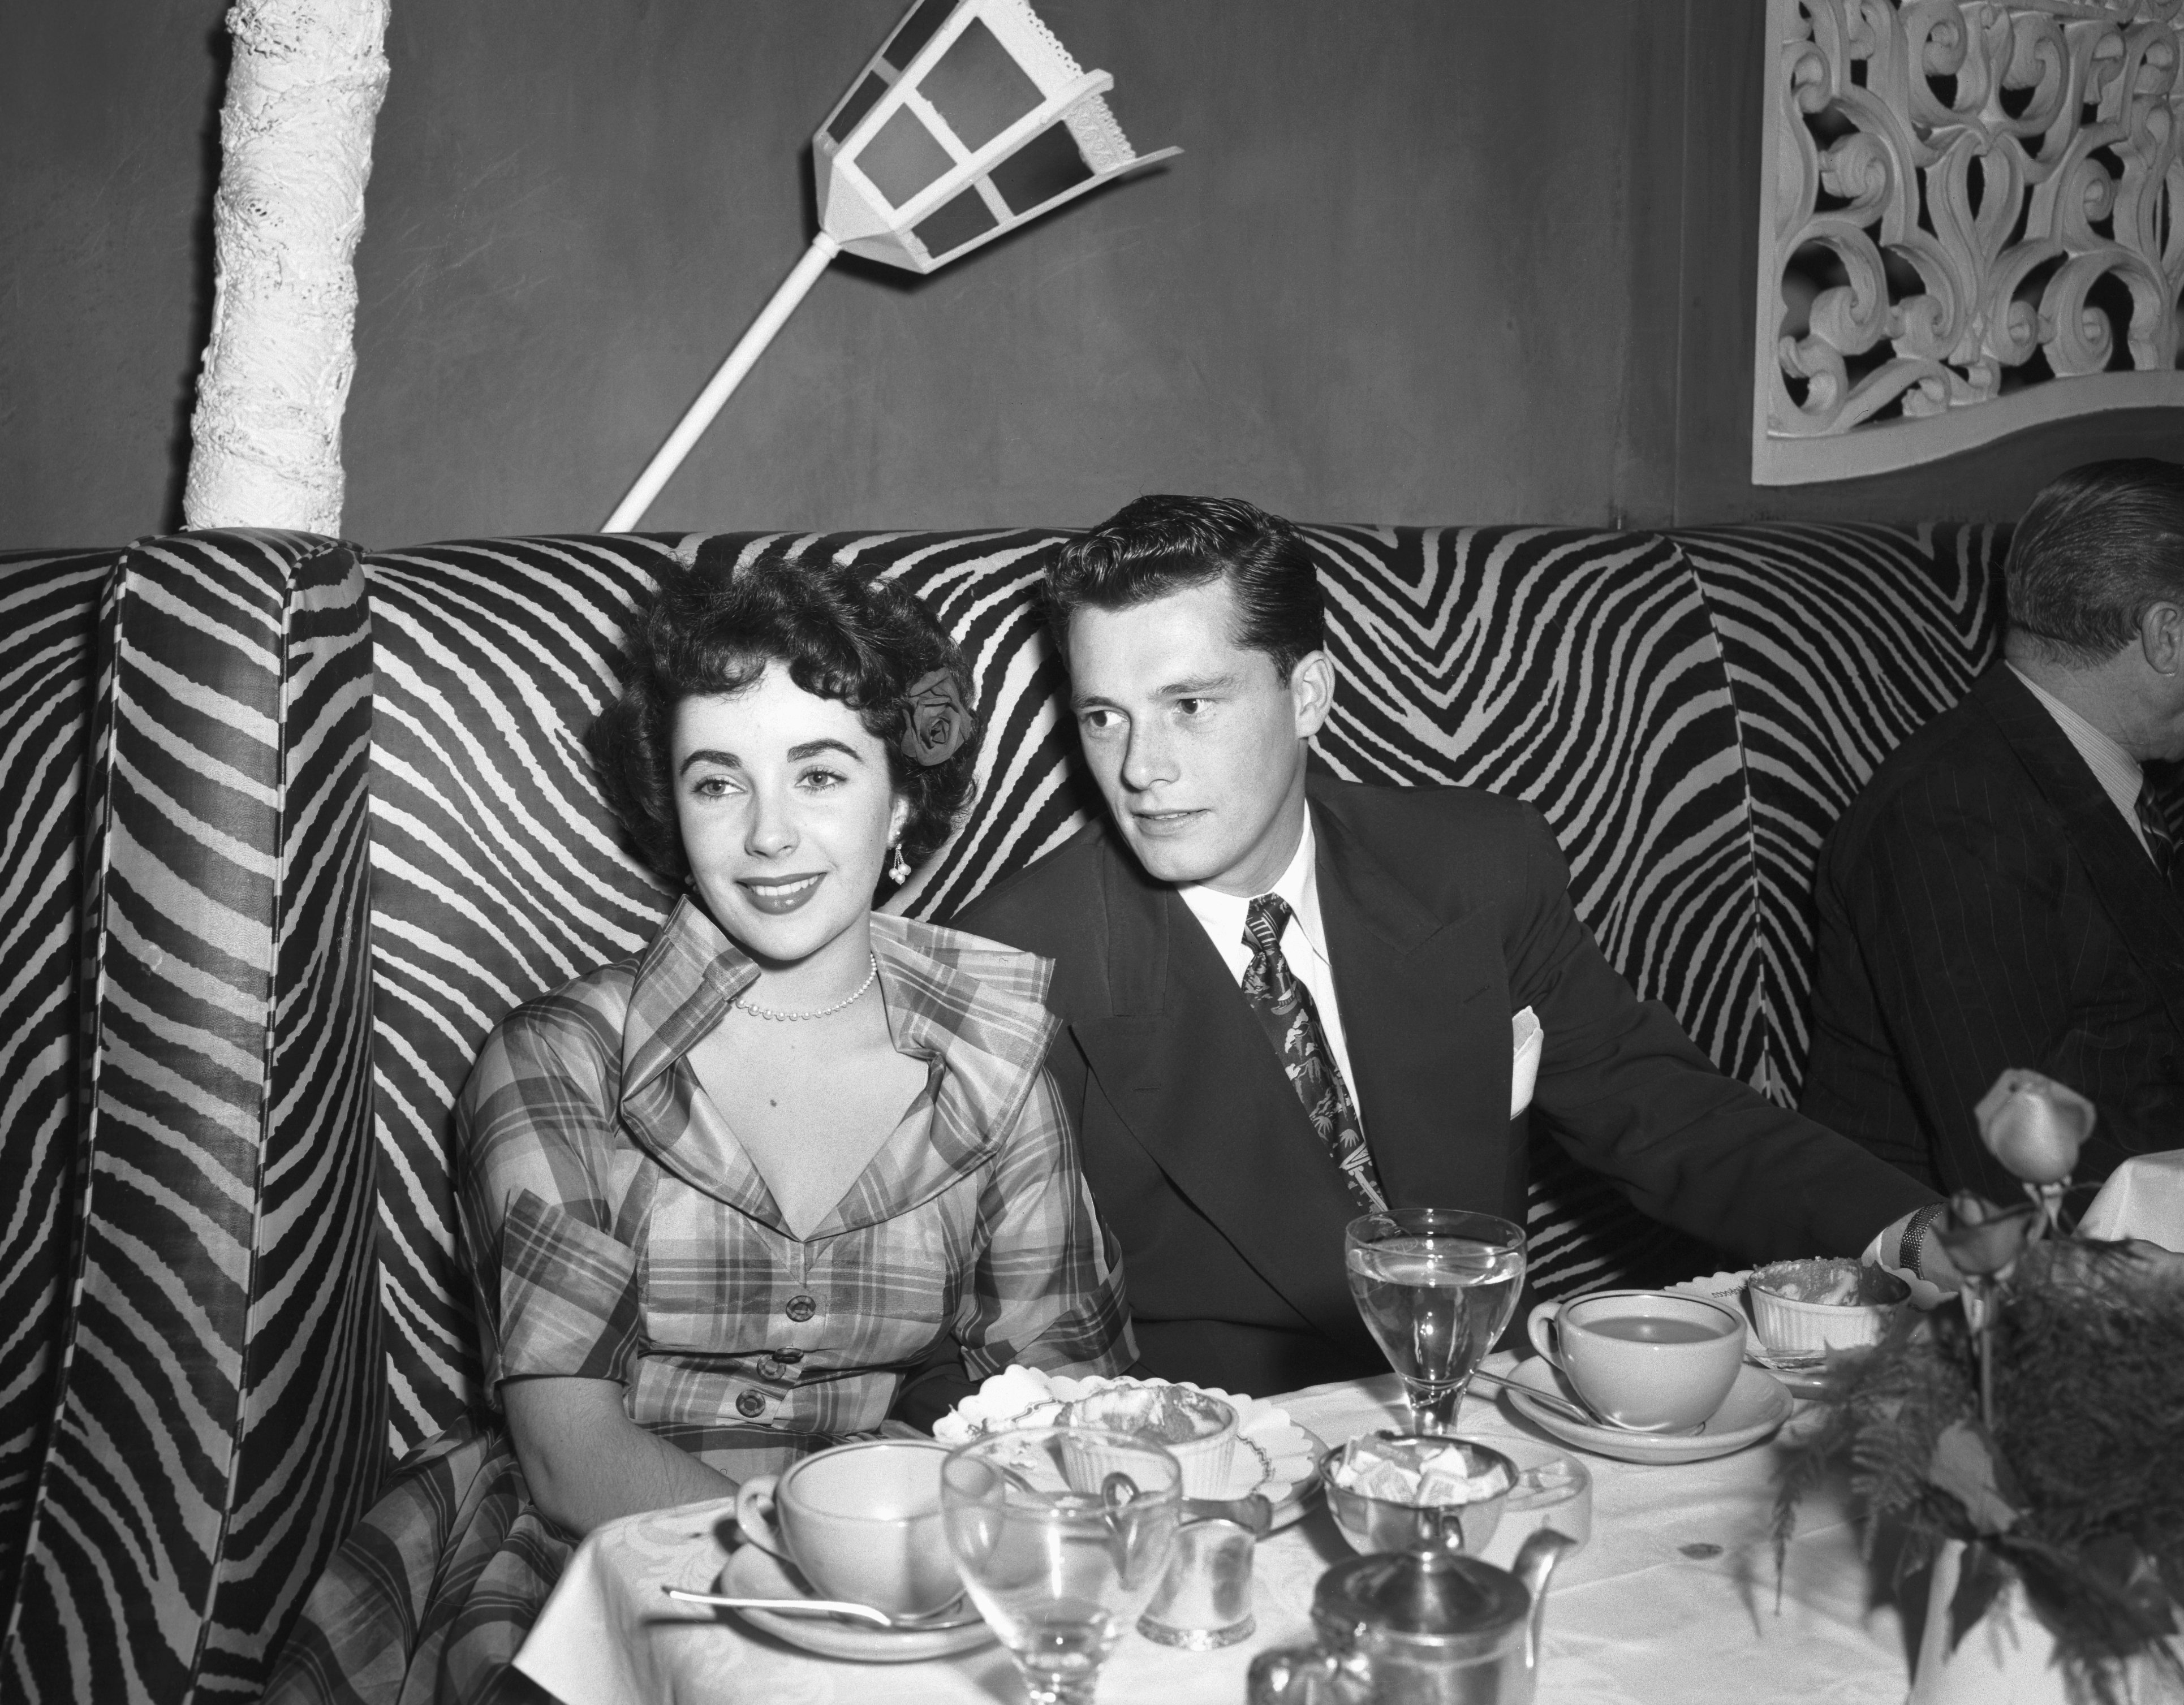 Elizabeth Taylor photographed with Conrad Hilton Jr. in a booth at the El Morocco nightclub. / Source: Getty Images